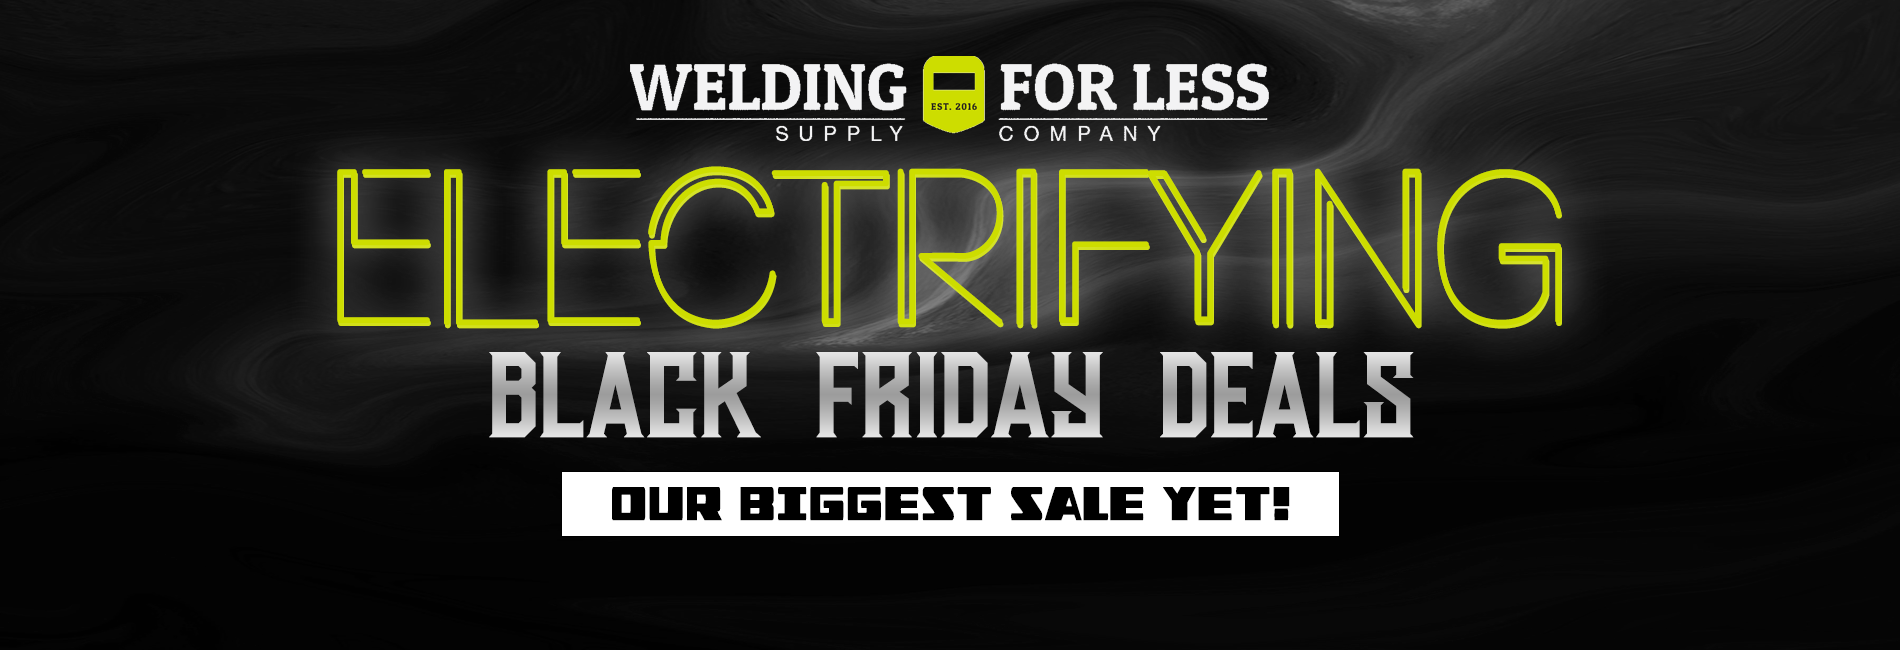 Welding For Less Black Friday Cyber Monday Deals. Our biggest sale yet!